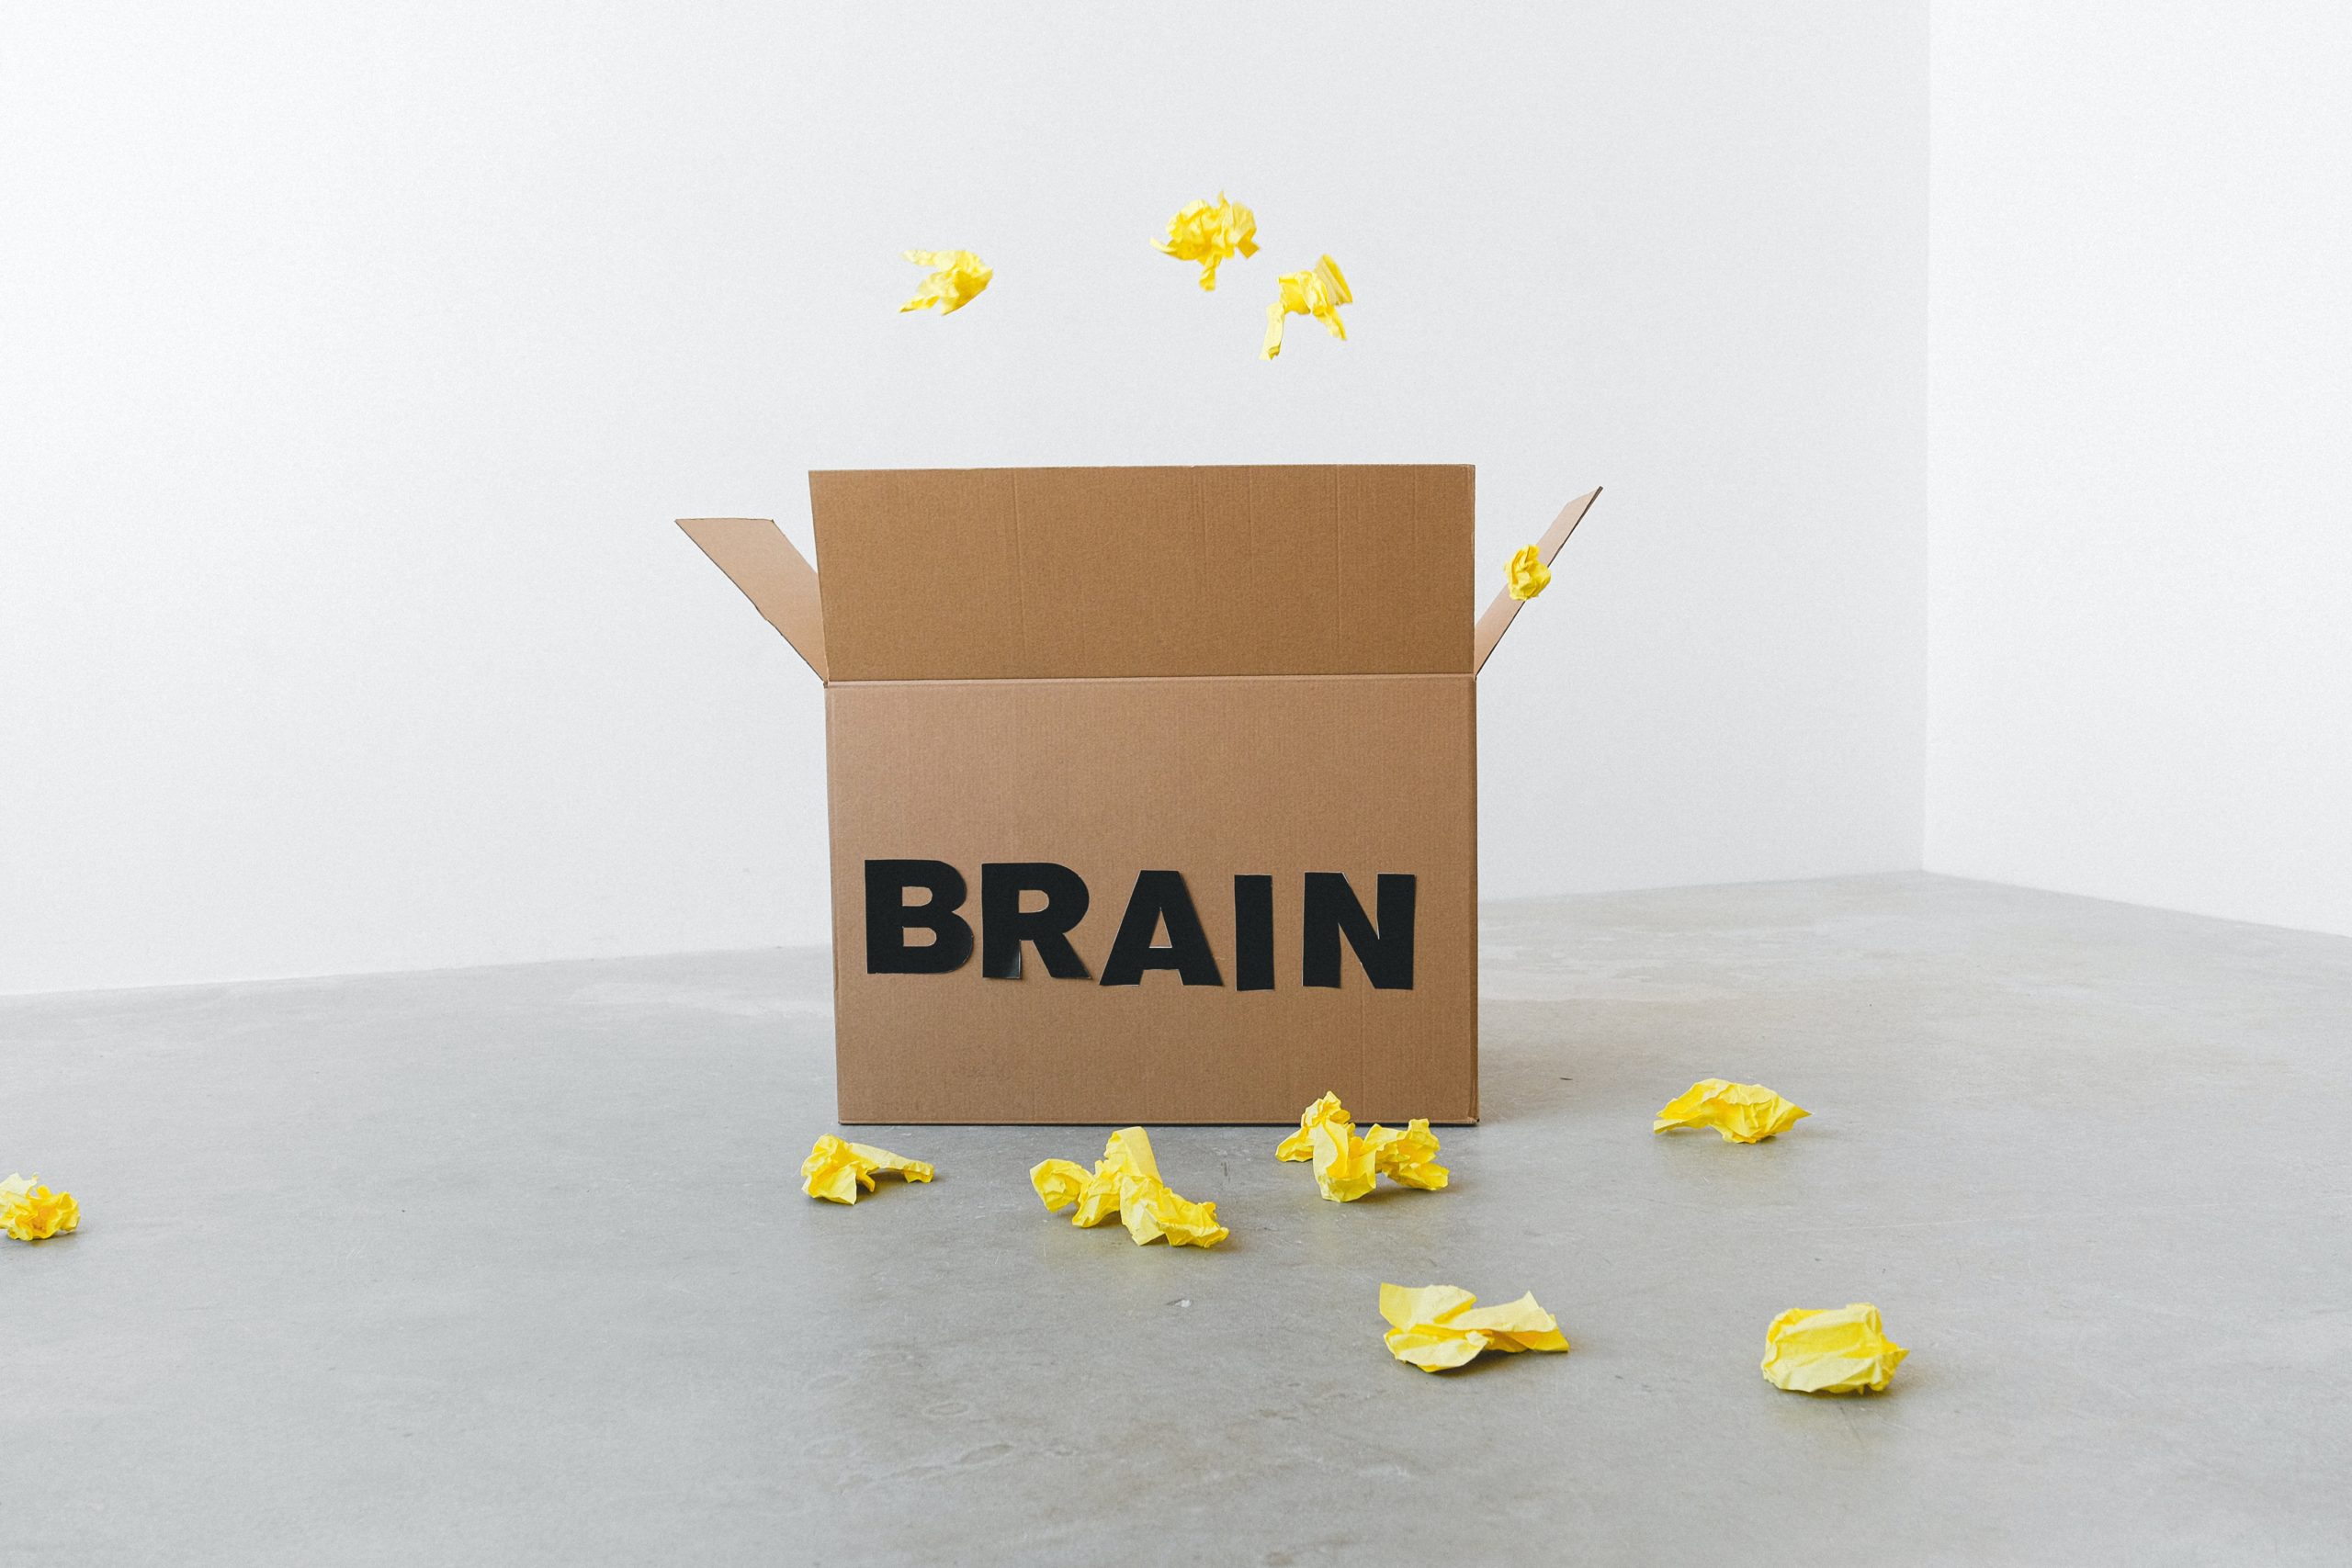 Some scrunched up pieces of paper are being thrown into a box with the word, "BRAIN," on it.